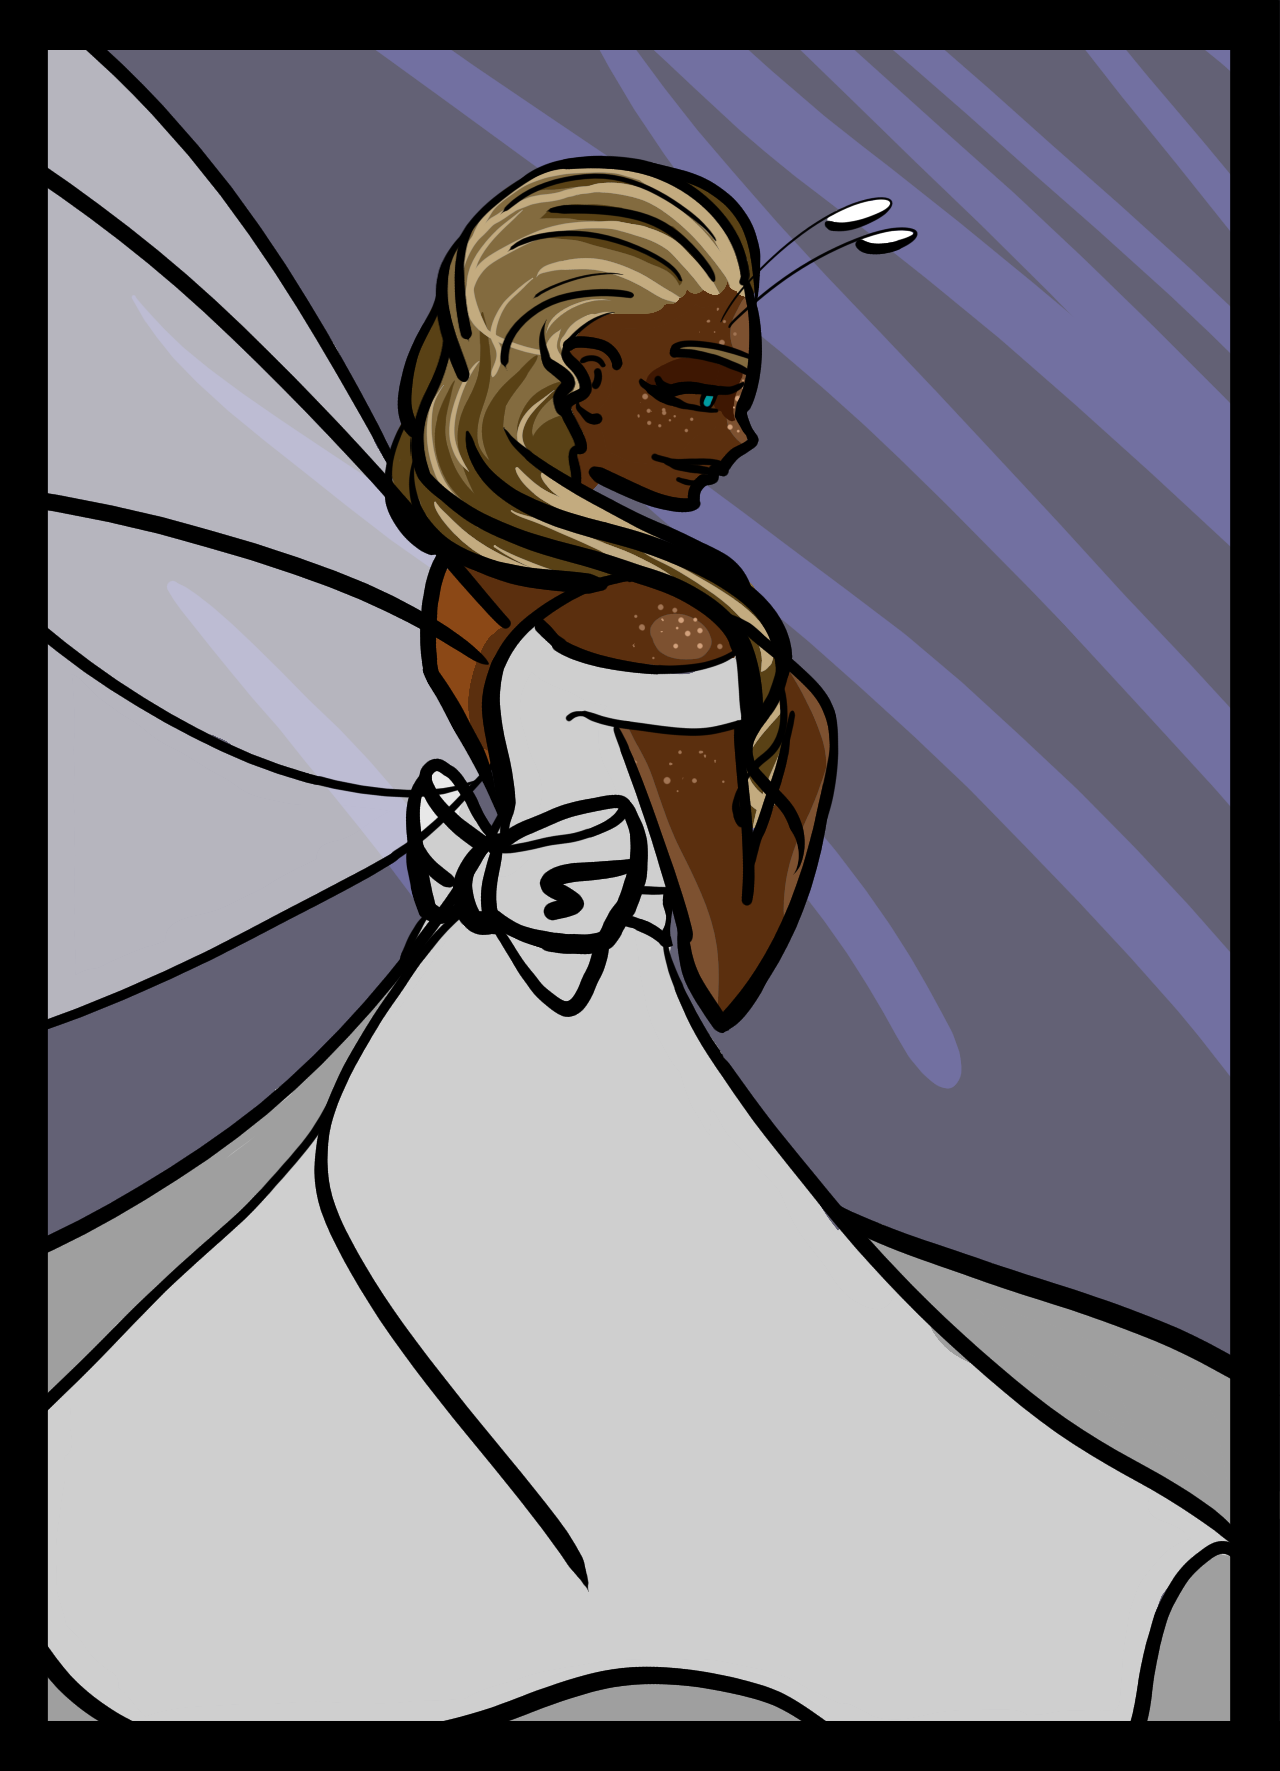 Page 39: A young woman is wearing a silk, backless dress. Fairy-like wings protrude from her back and straight hair sweeps over her shoulders. She has a button nose, short jaw, and delicate antennae coming out of her forehead.